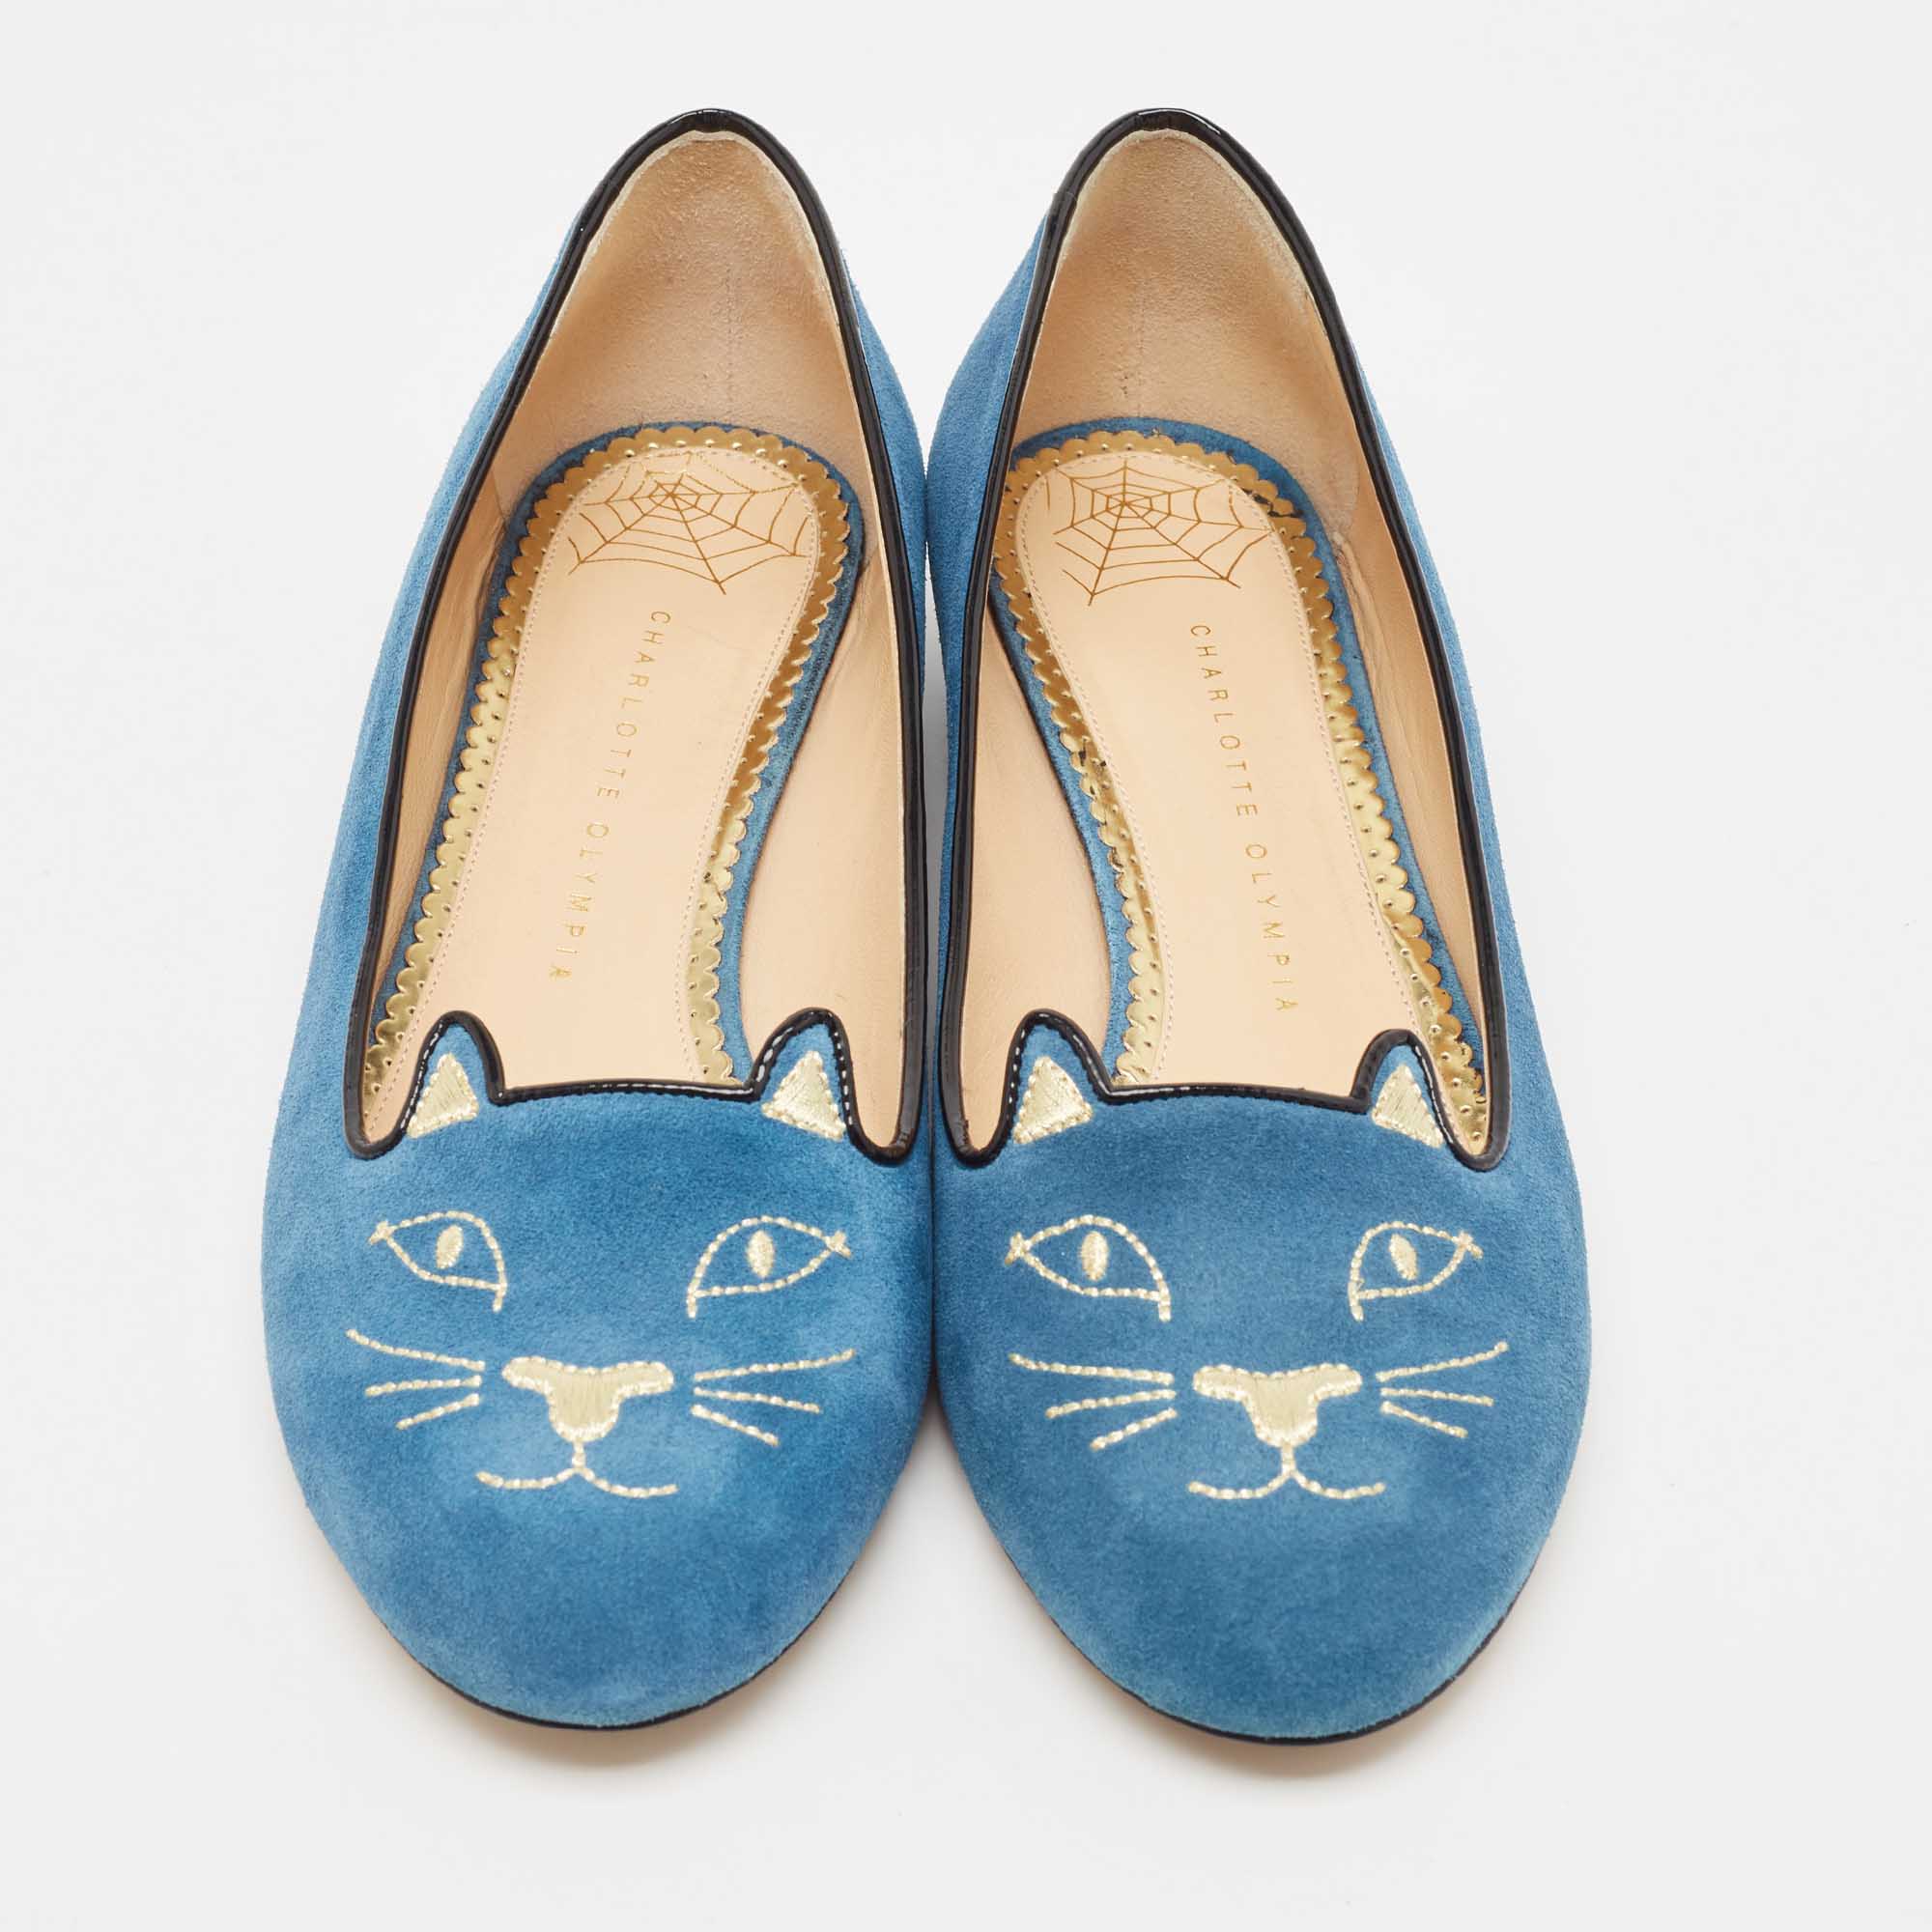 Charlotte Olympia Blue Suede Kitty Ballet Flats Size 42